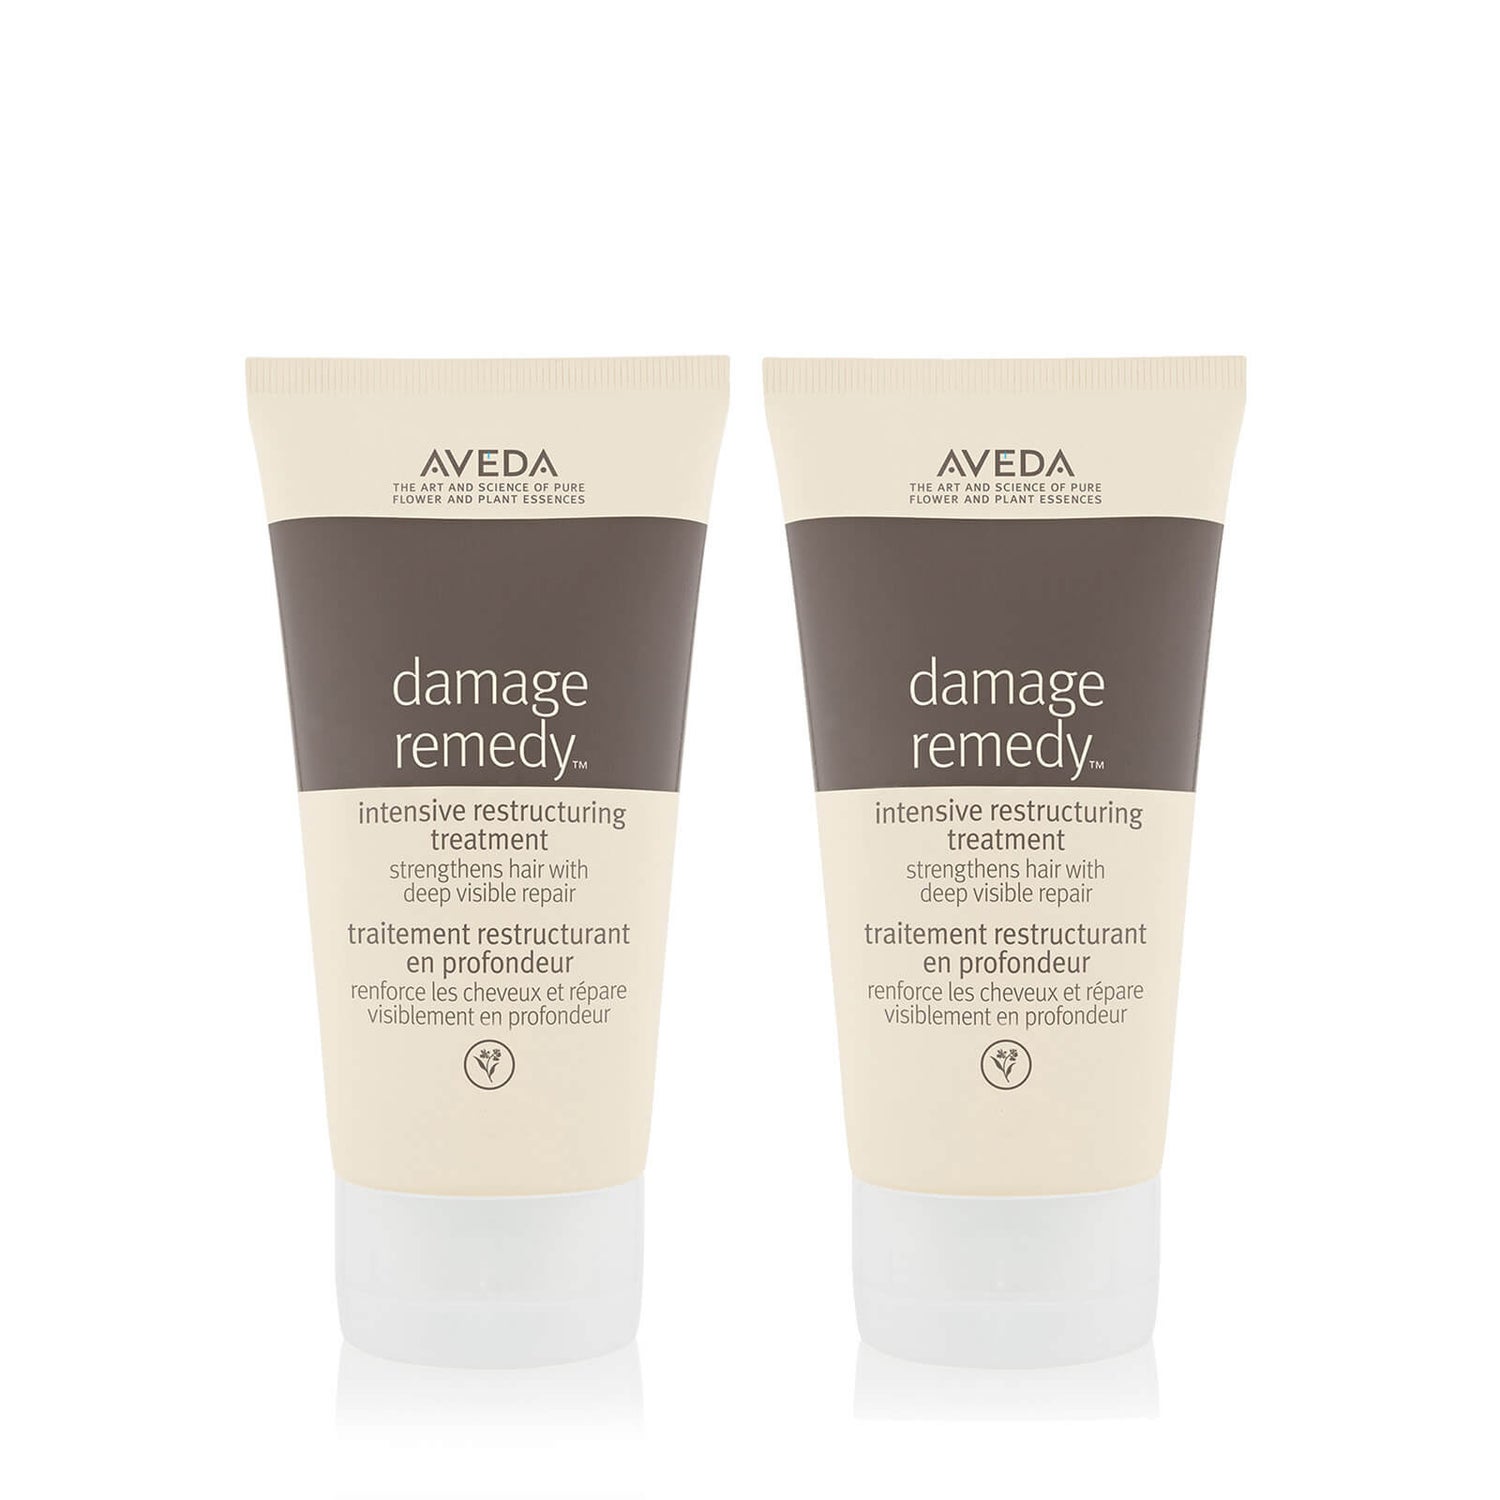 Aveda Damage Remedy Intensive Restructuring Treatment Duo